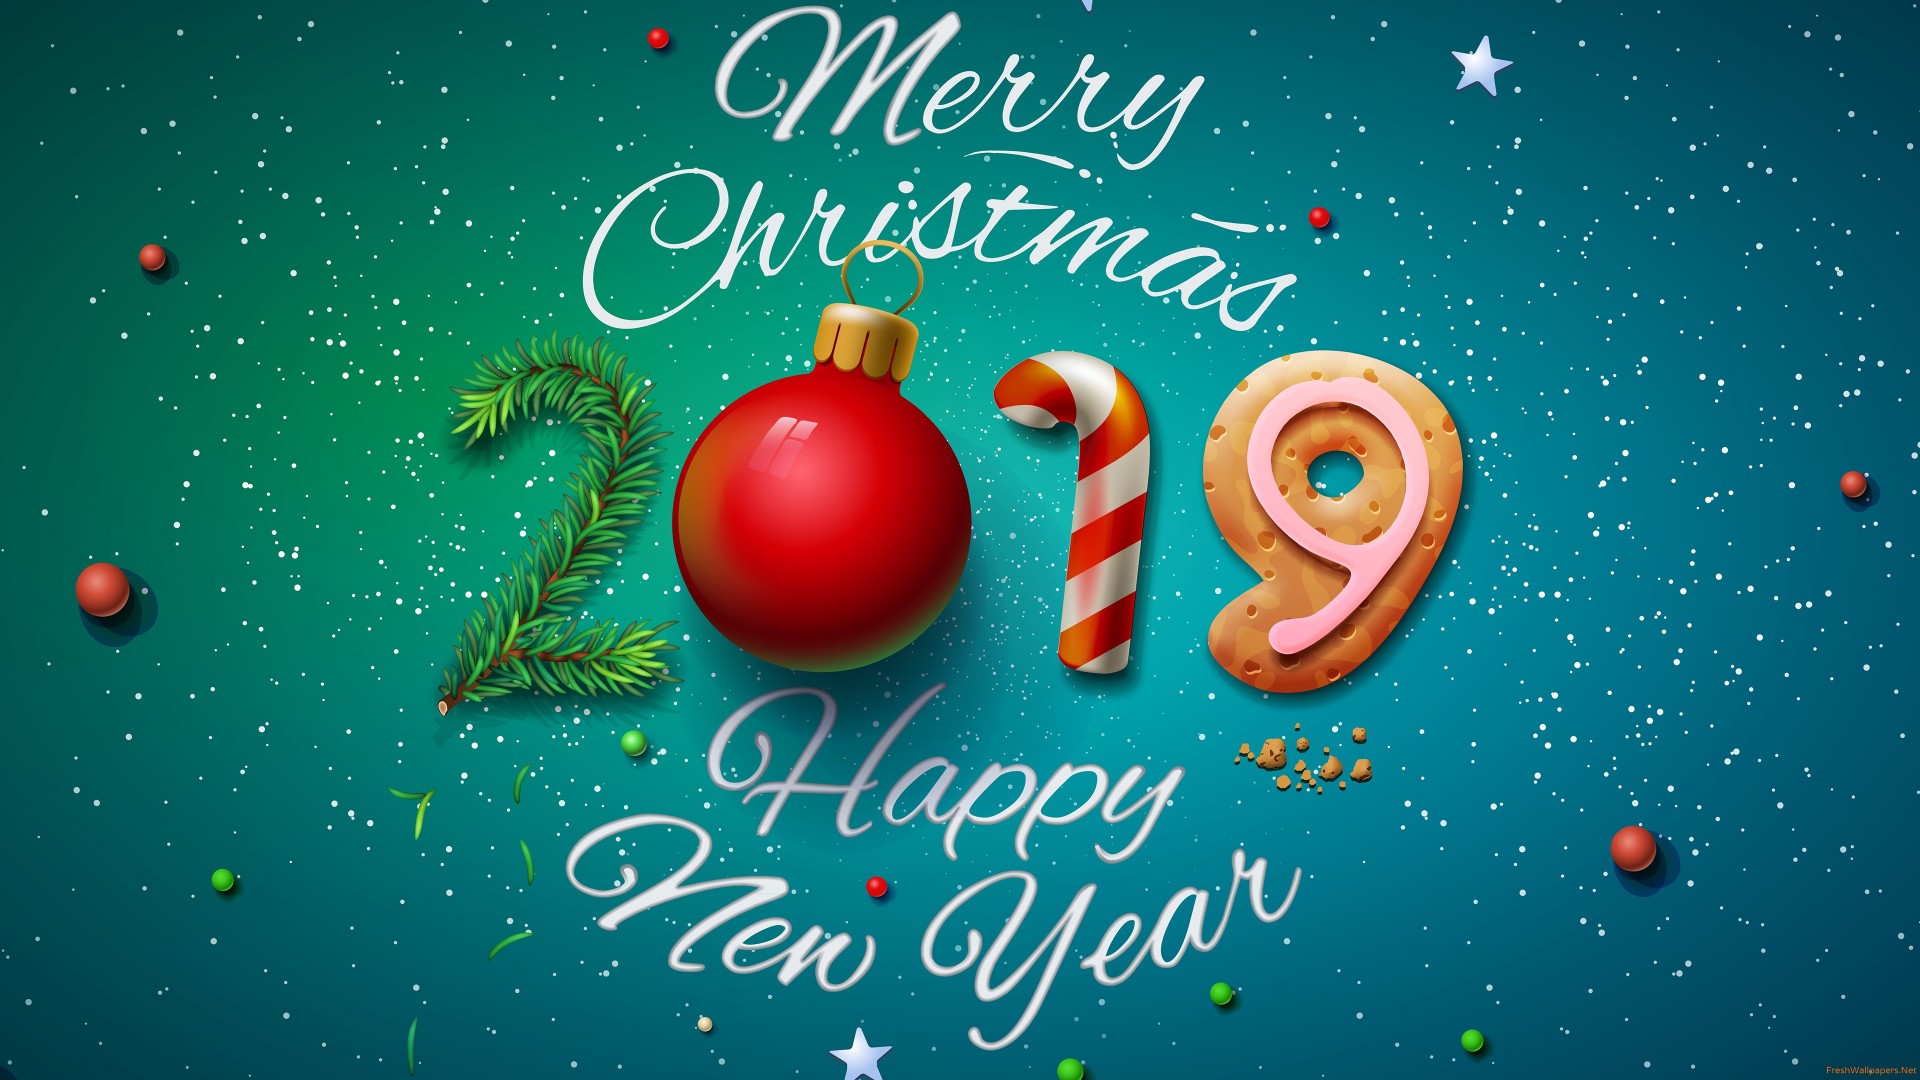 Merry Christmas 2019 Happy New Year wallpapers Freshwallpapers